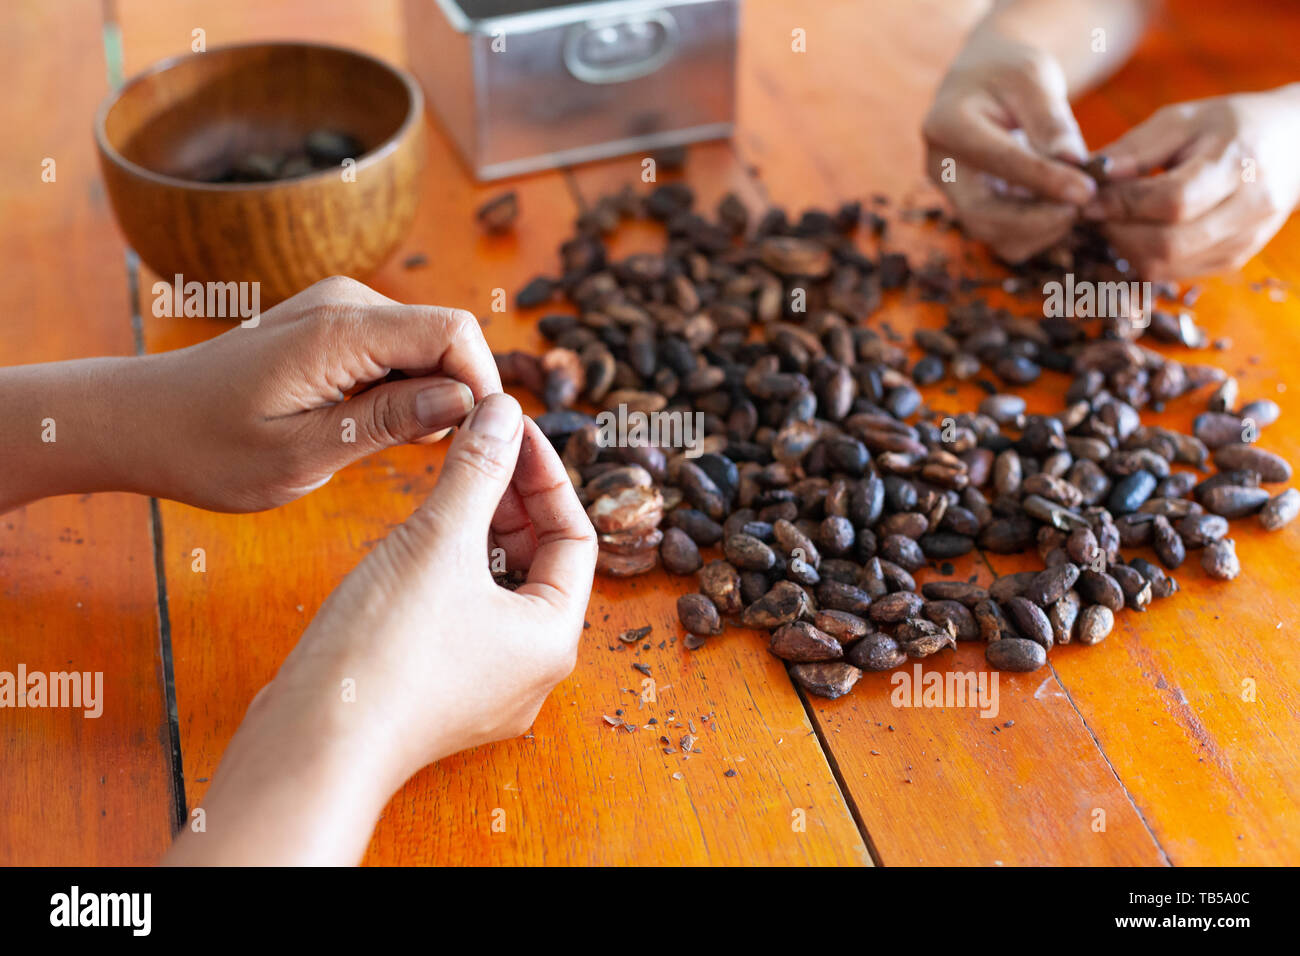 Cracking and deshelling roasted cocoa (Theobroma cacao) beans by hand (winnowing) Stock Photo